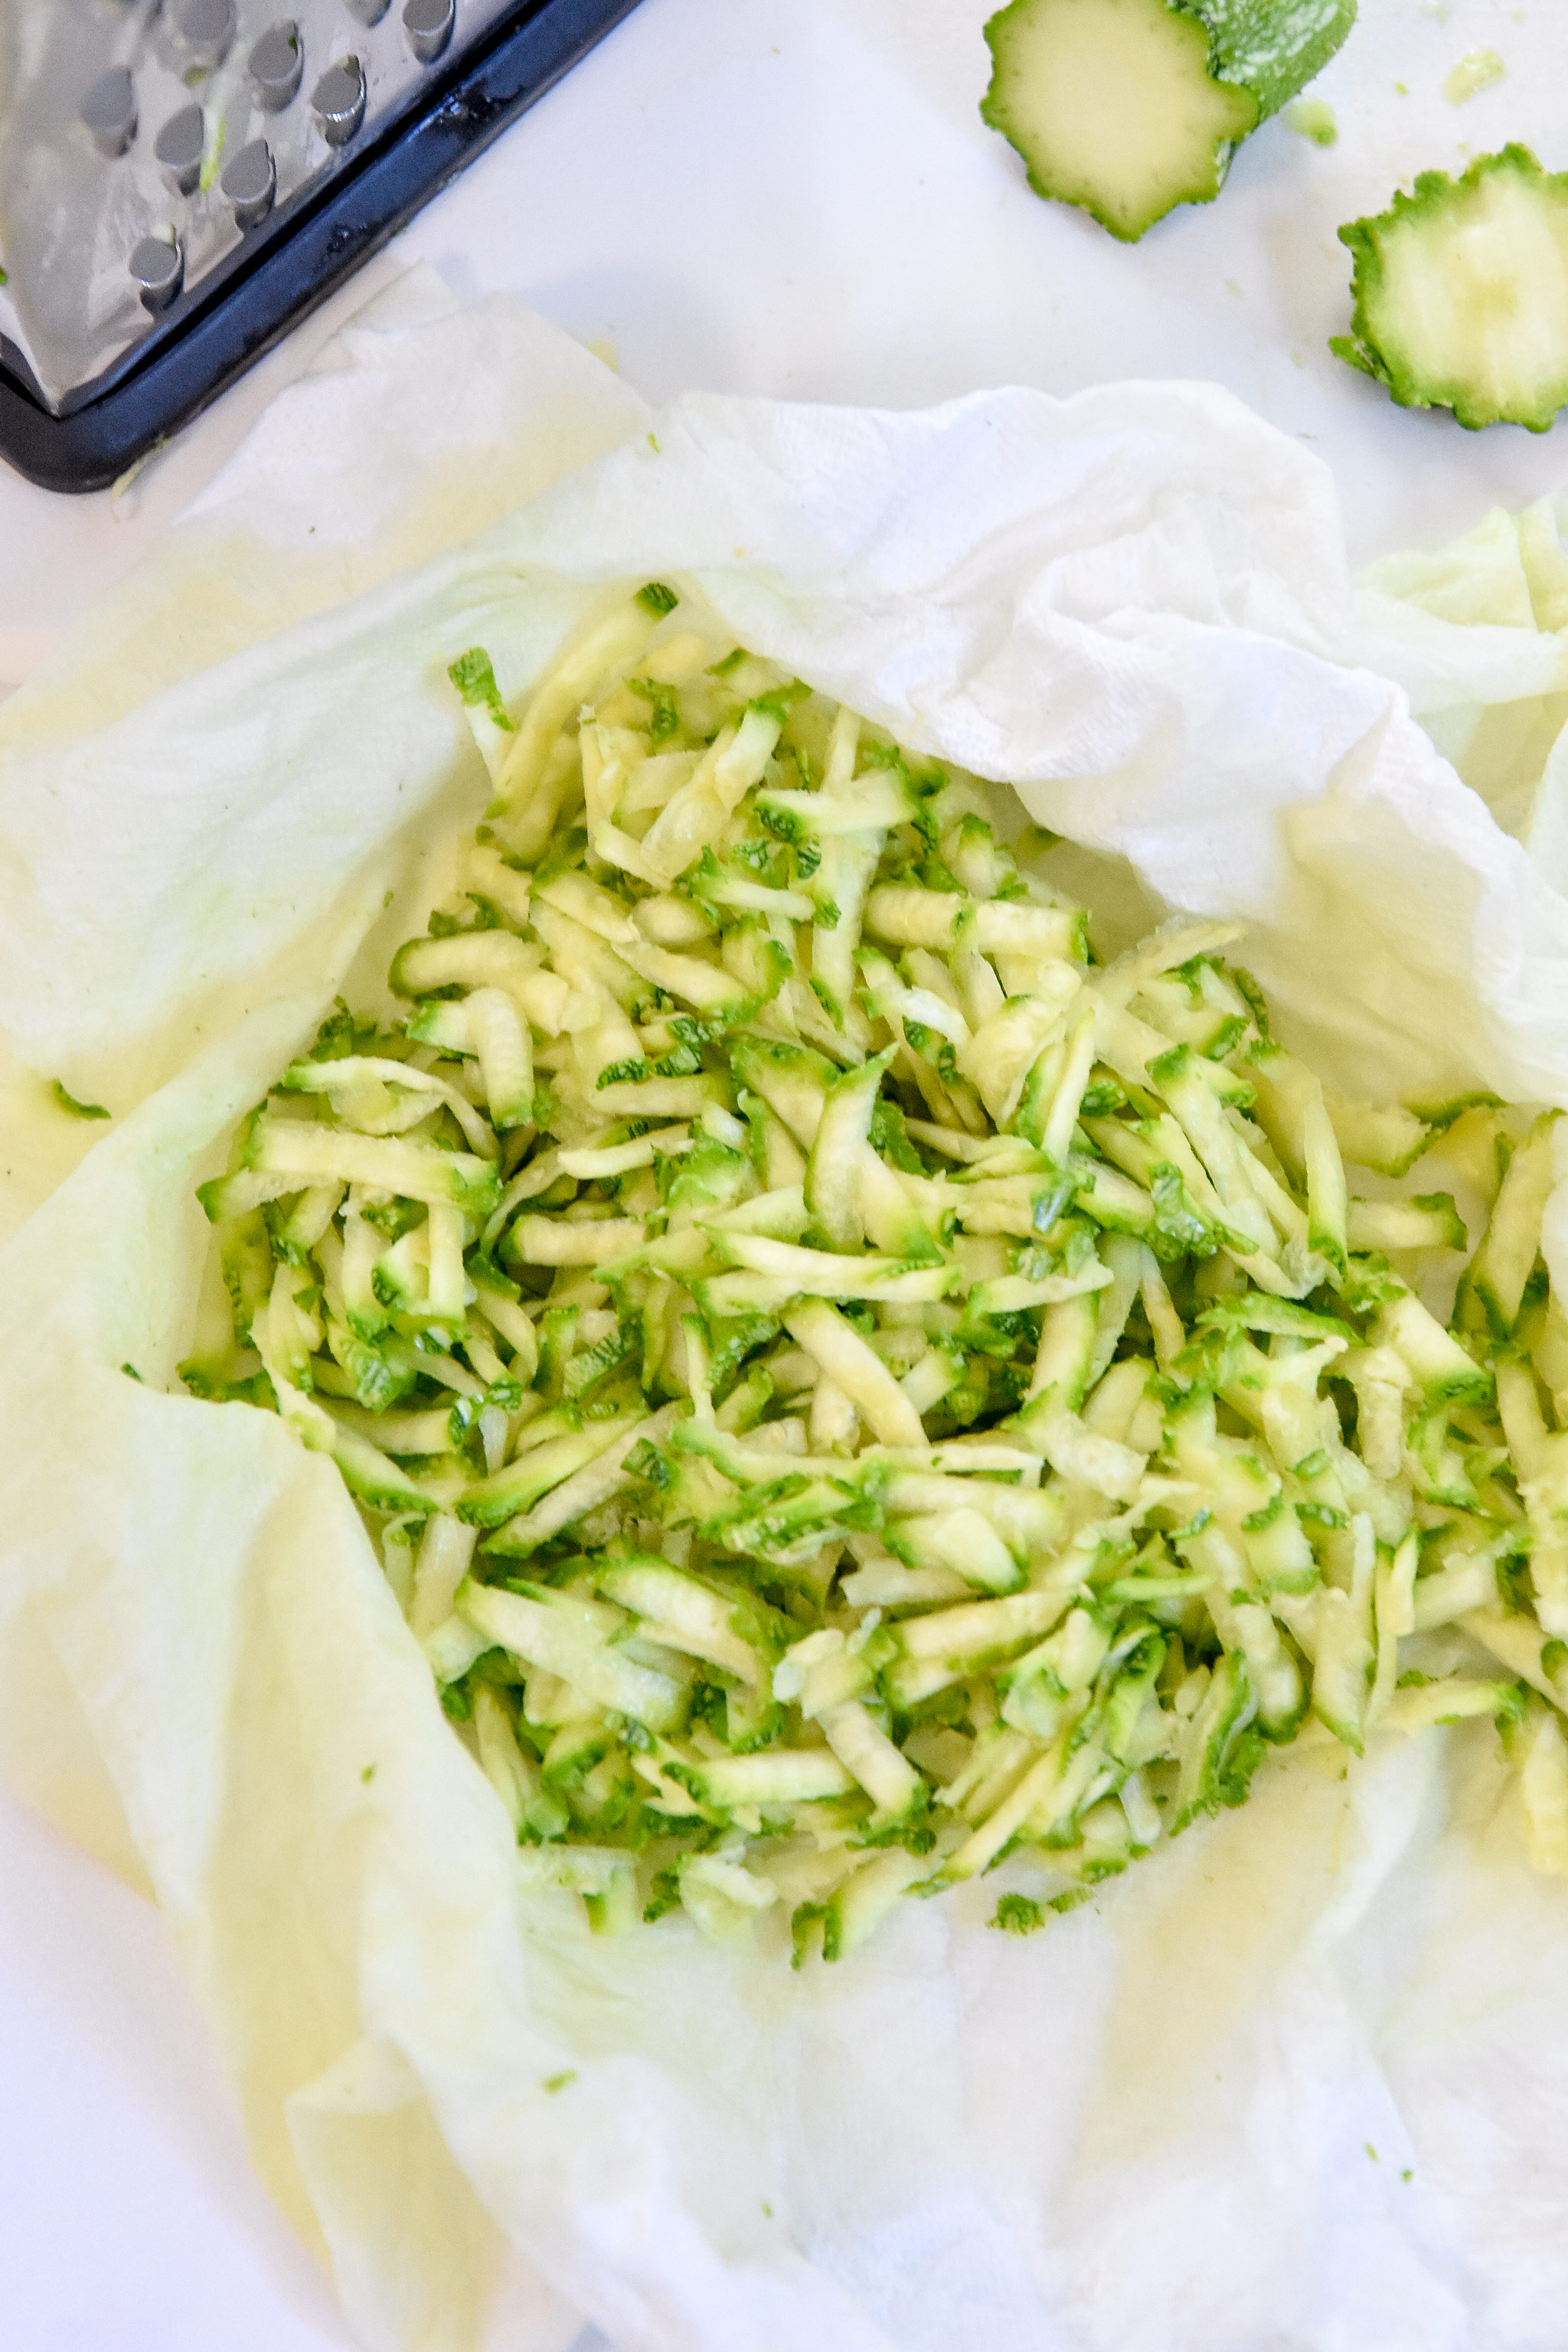 shredded zucchini in a paper towel being prepared for the muffins.